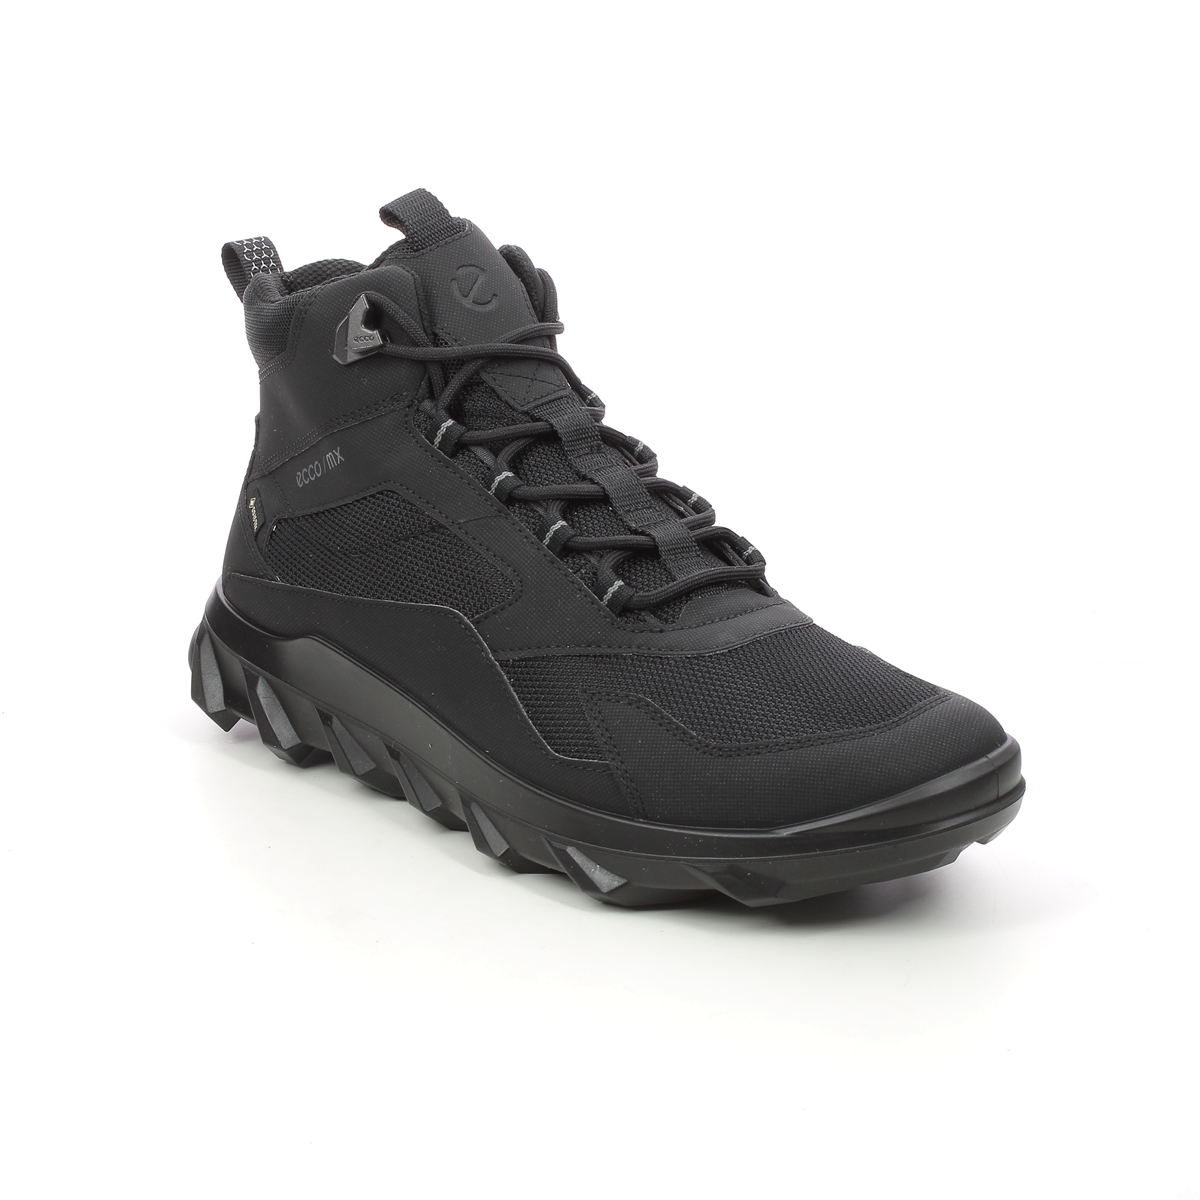 Ecco Mx Mid Mens Boot Gtx Black Mens Outdoor Walking Boots 820224-51052 In Size 44 In Plain Black